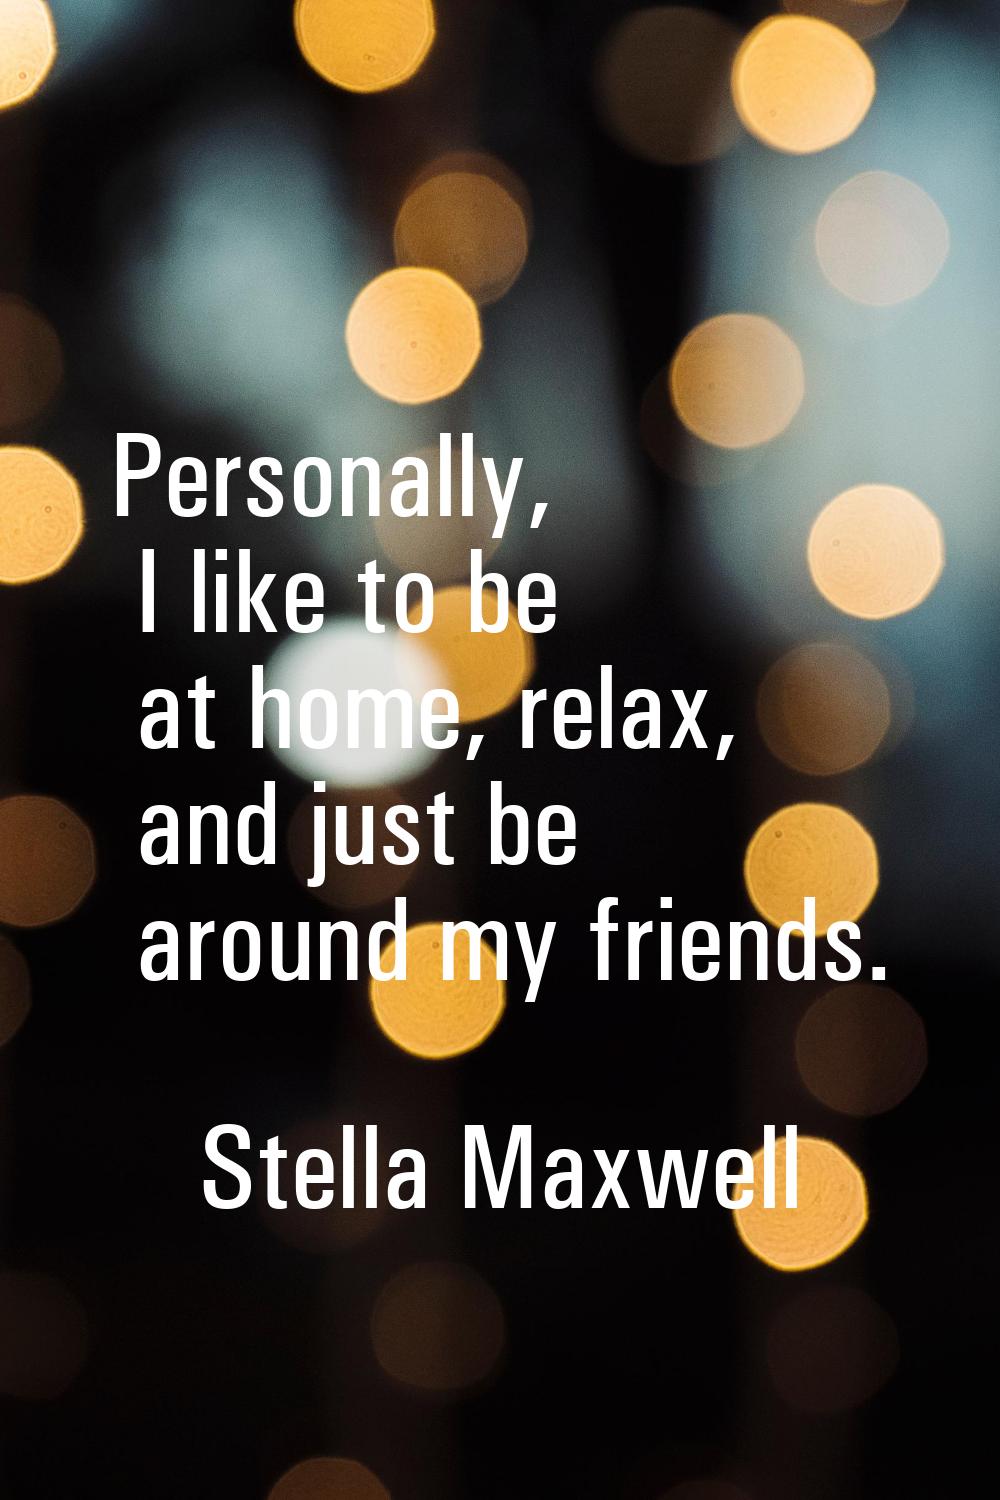 Personally, I like to be at home, relax, and just be around my friends.